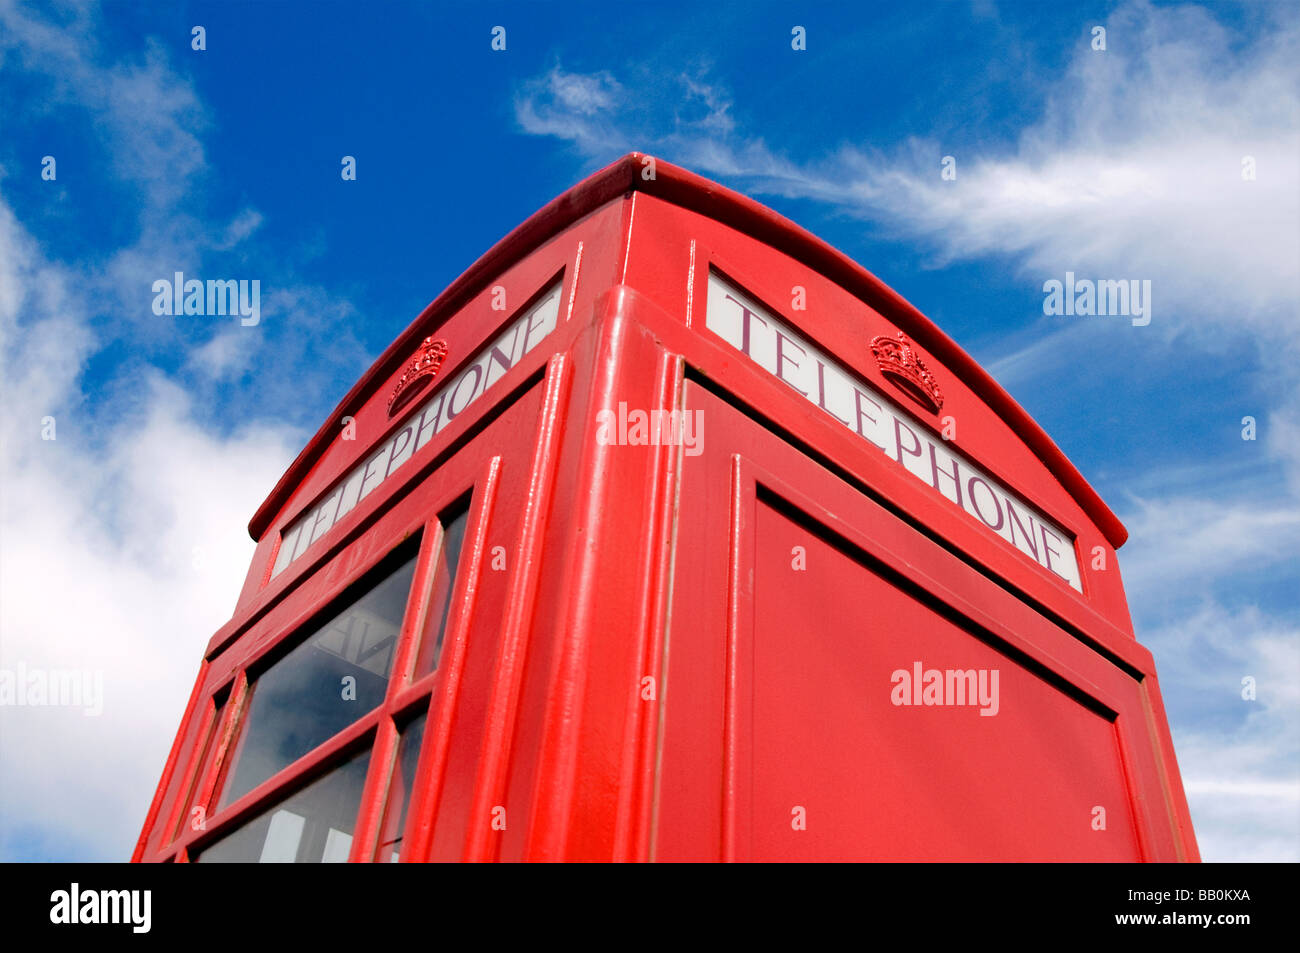 An iconic red British telephone box contrasted against a blue sky and white clouds Stock Photo